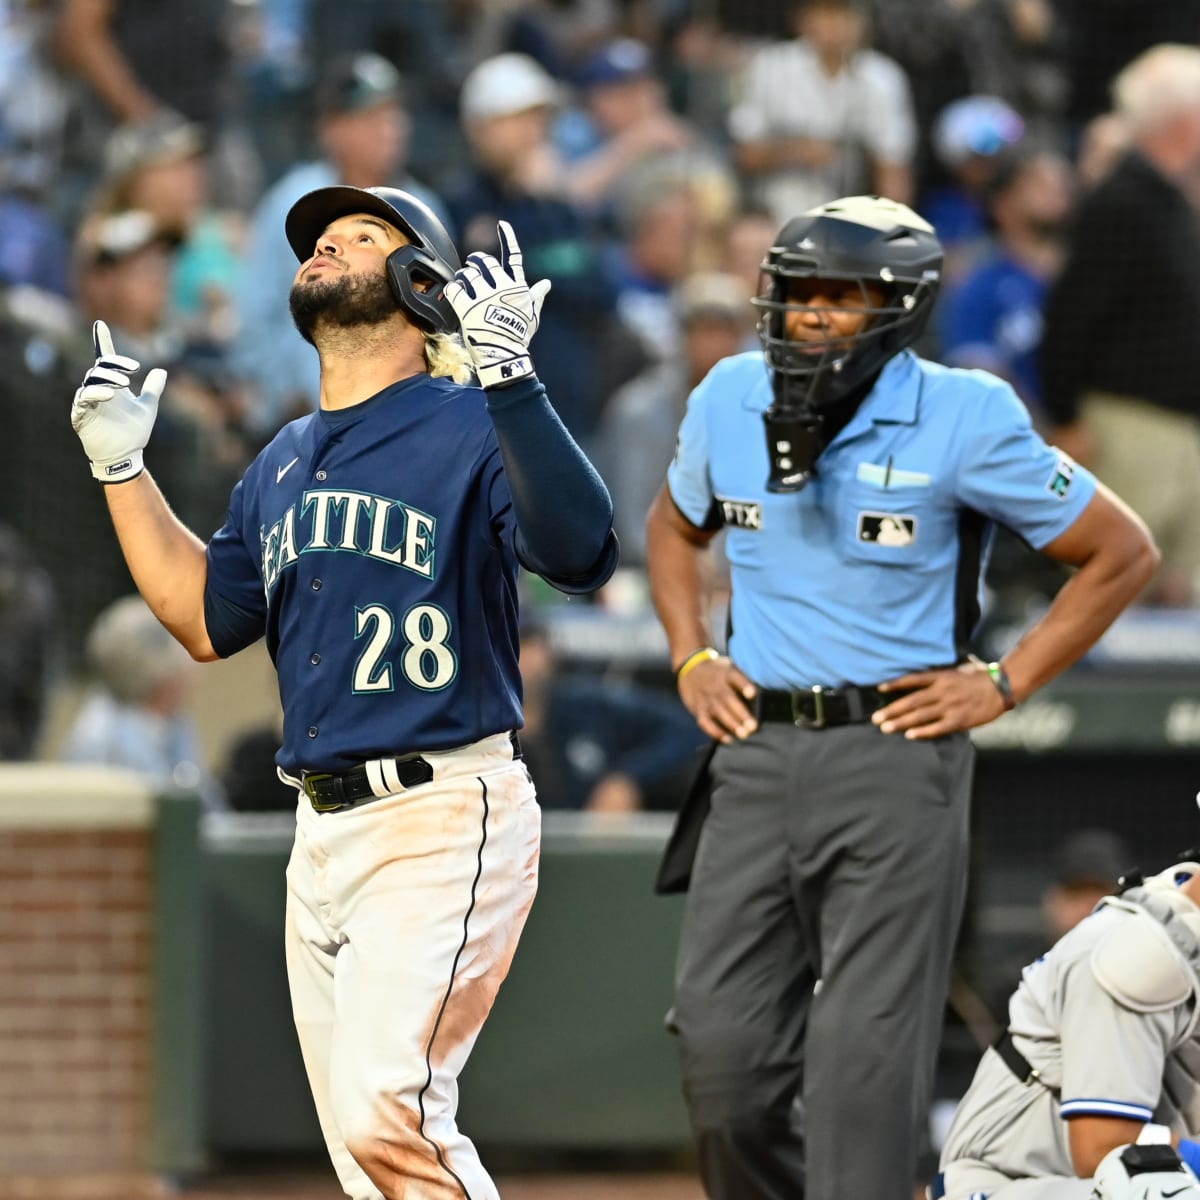 Eugenio Suarez is showing he could be 'pick to click' for Mariners